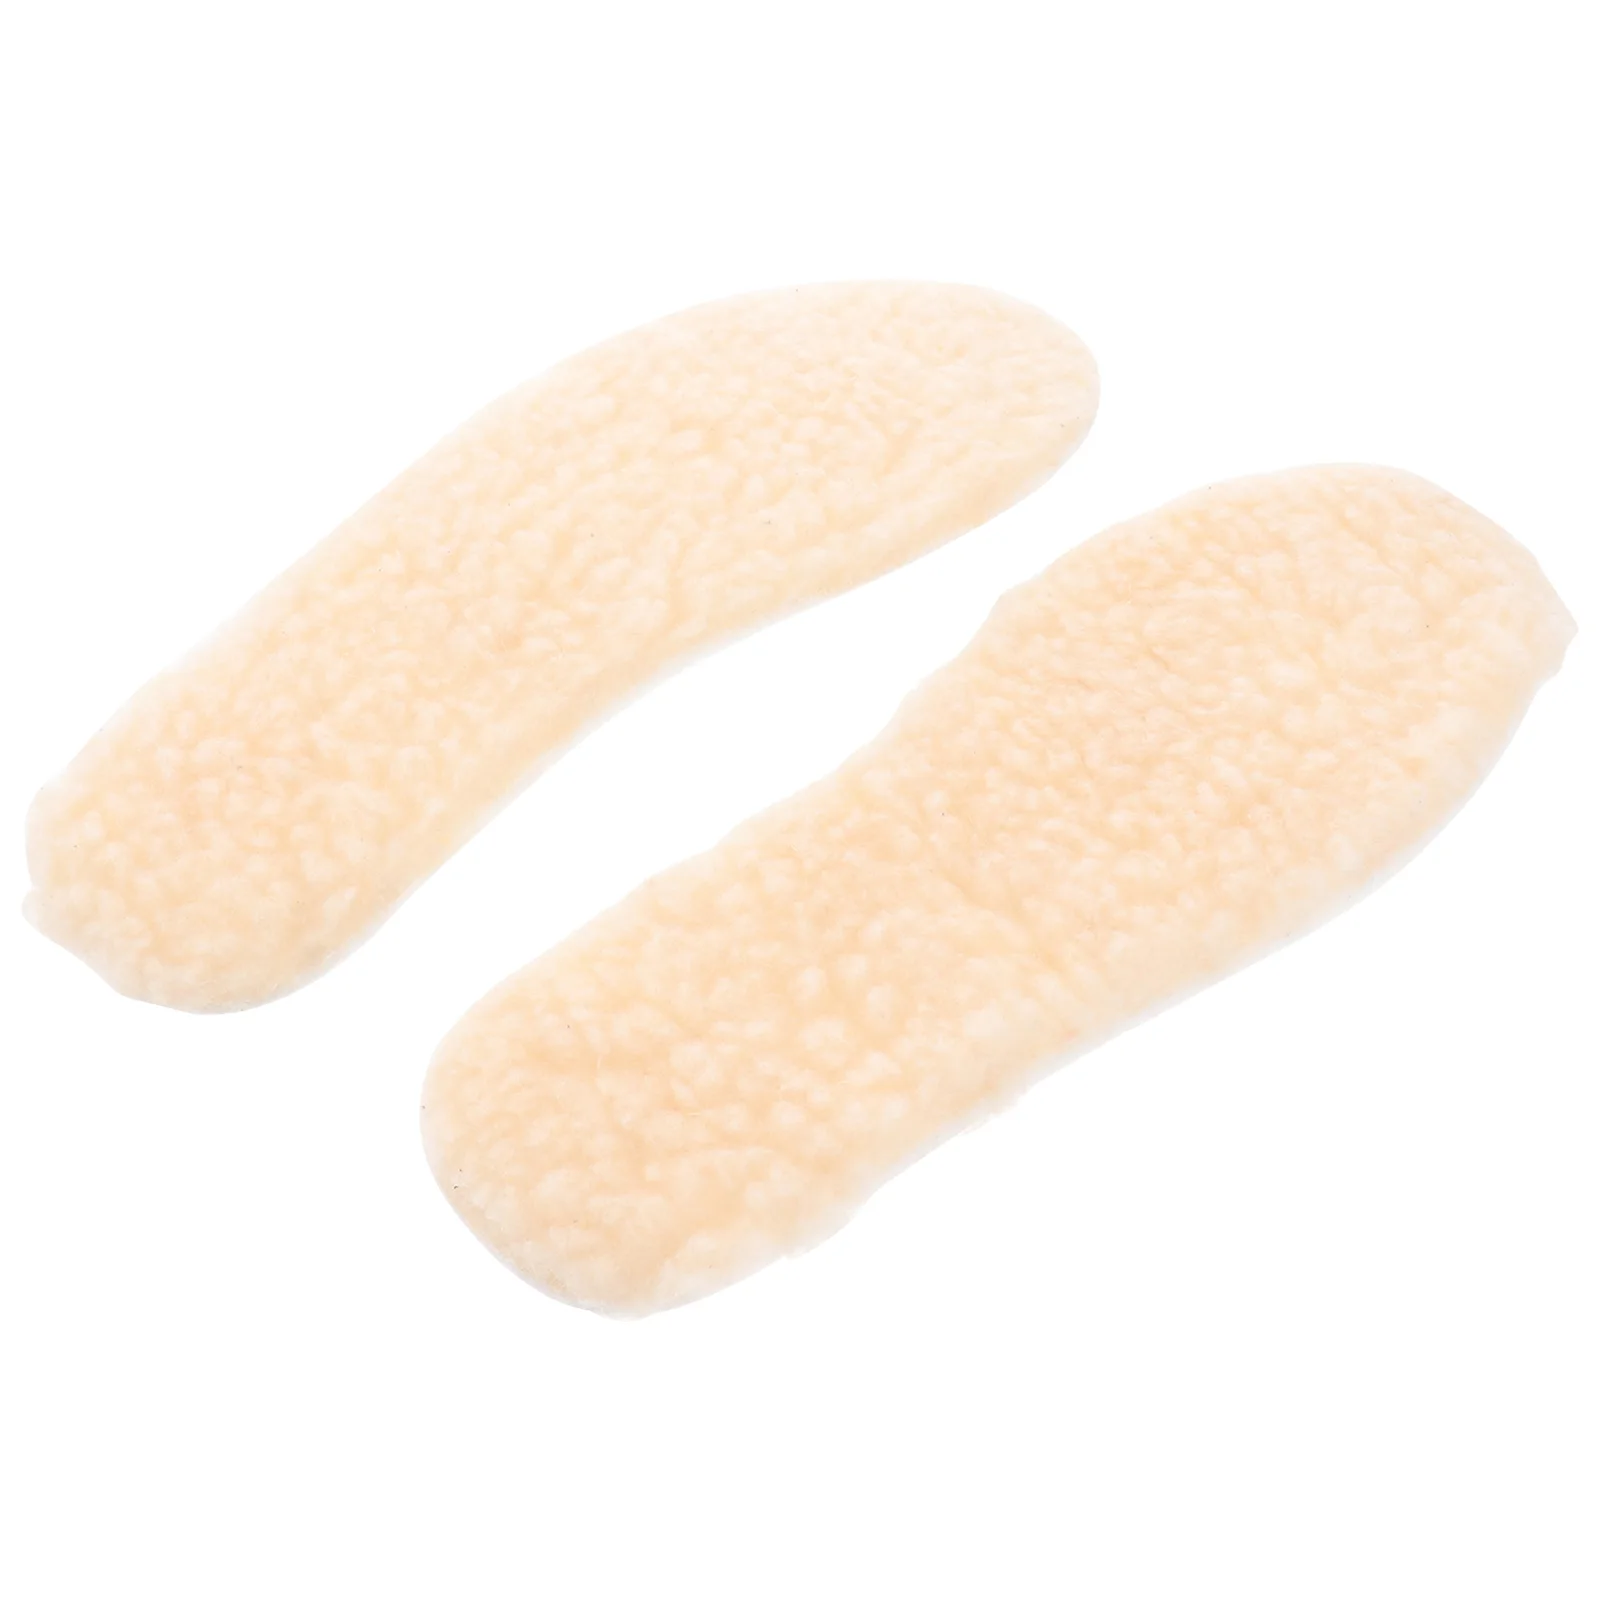 Children's Insoles Breathable Warm Imitation Lamb Hair Shoes Shoe-pad Accessory Winter Shoes-pad Boots 2 pair natural sheepskin insoles winter real fur wool insoles men women children soft thick warm cashmere snow boots shoe pad